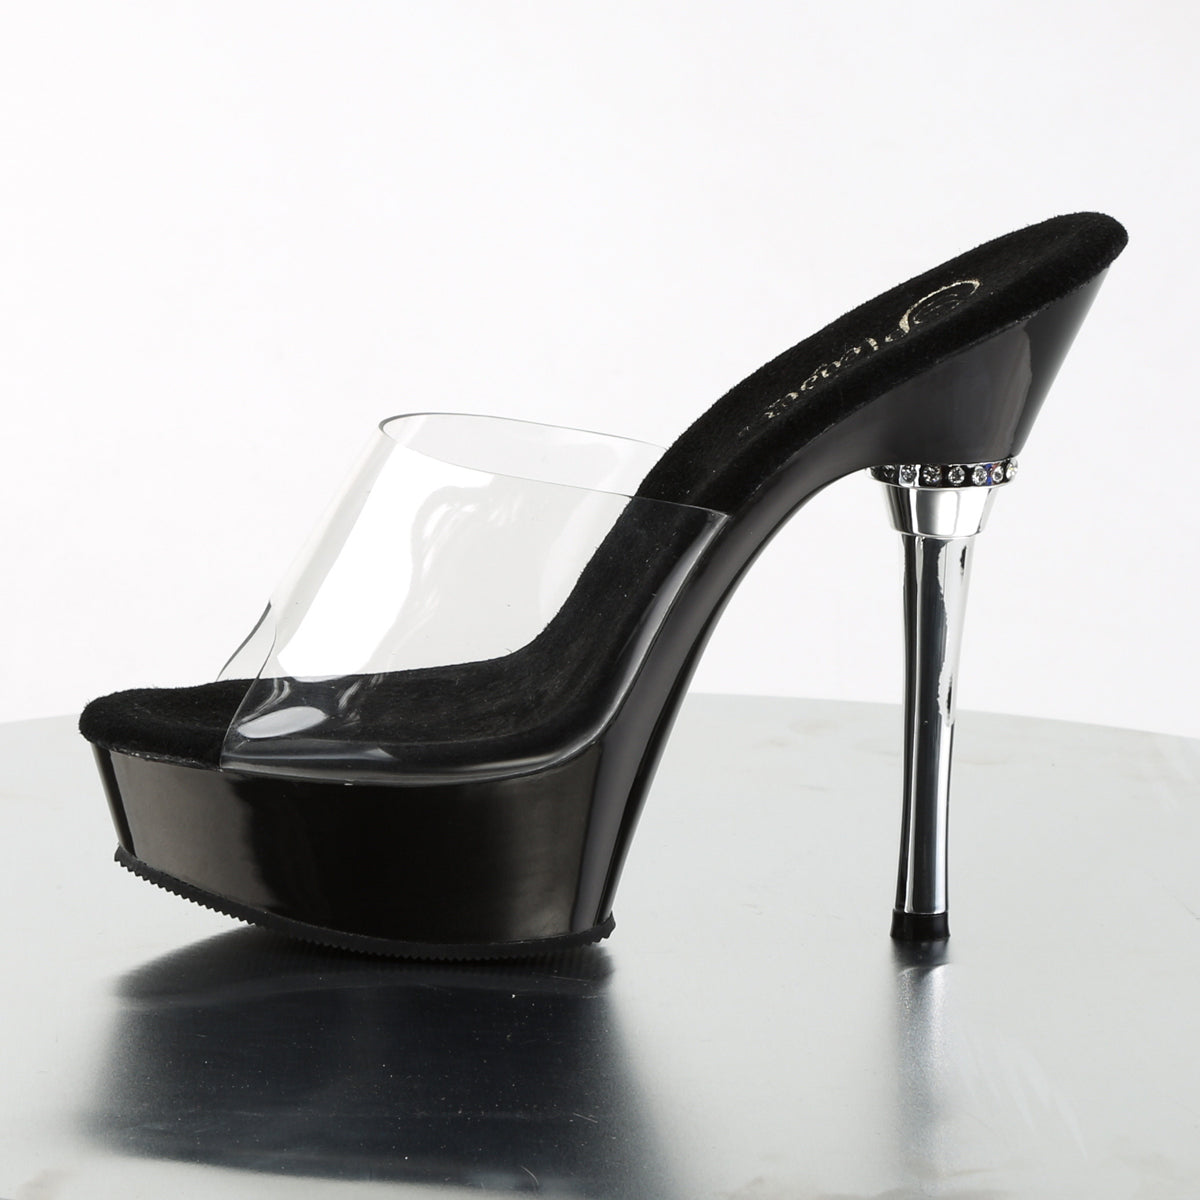 ALLURE-601 5.5" Heel Clear and Black Pole Dancing Shoes-Pleaser- Sexy Shoes Pole Dance Heels